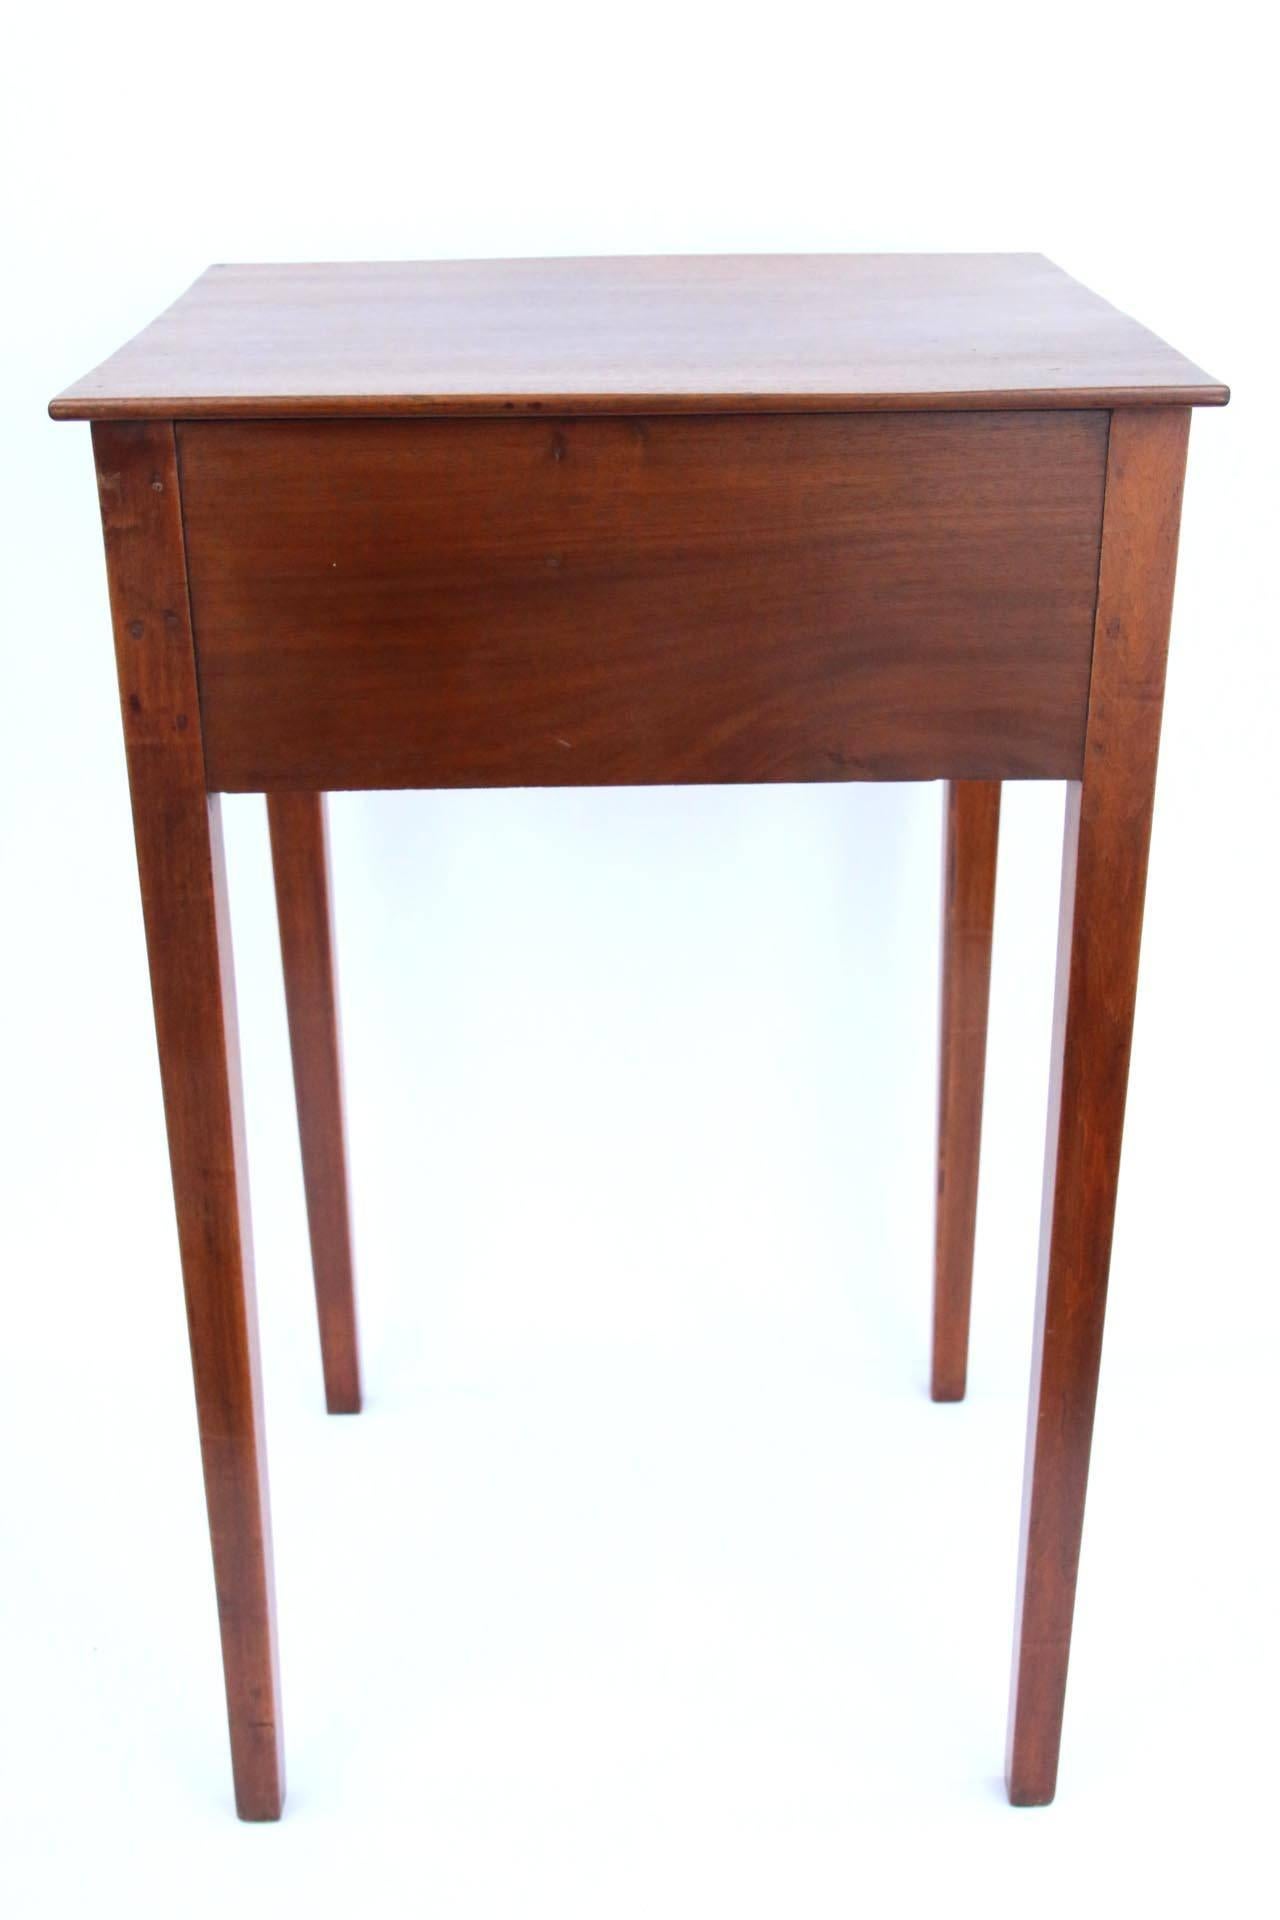 Mahogany Early 19th Century New England Nepplewhite Two-Drawer Side Table